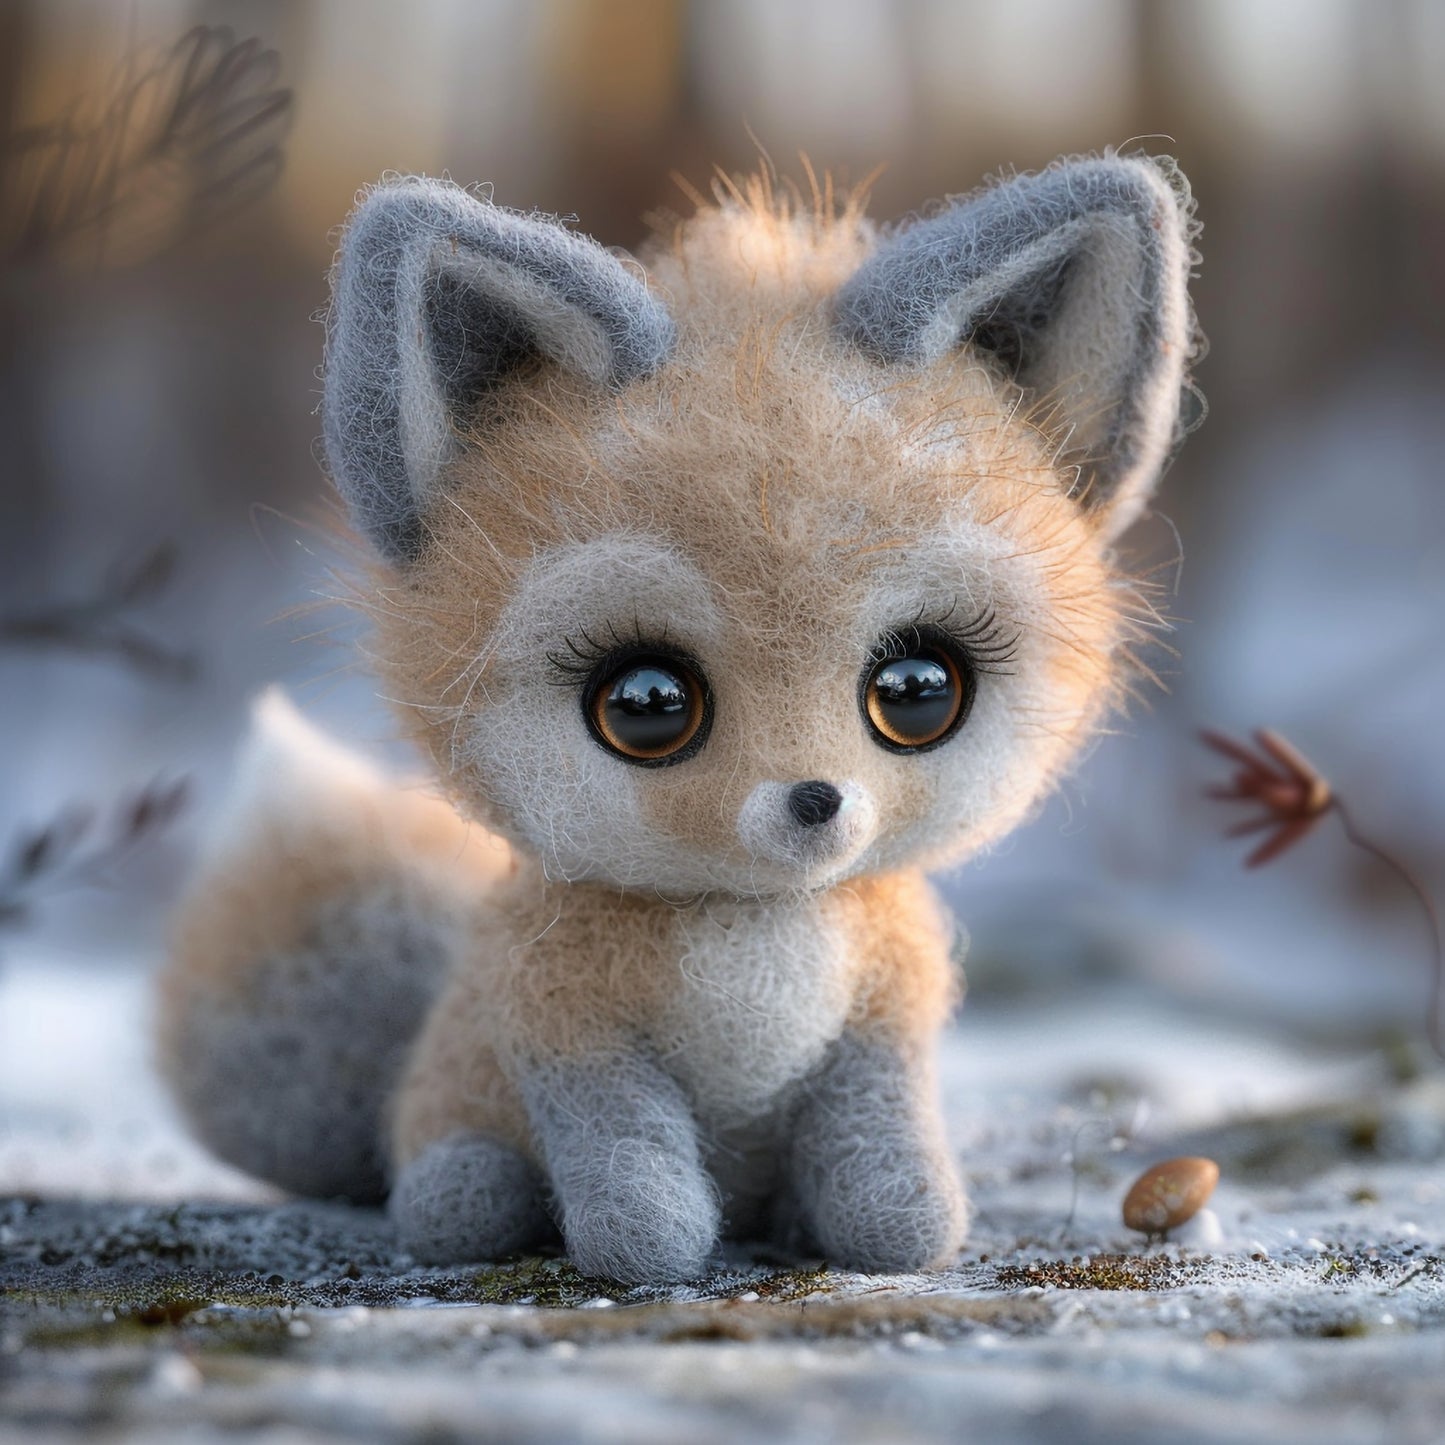 Charming Handmade Grey Toy Fox in a Natural Setting